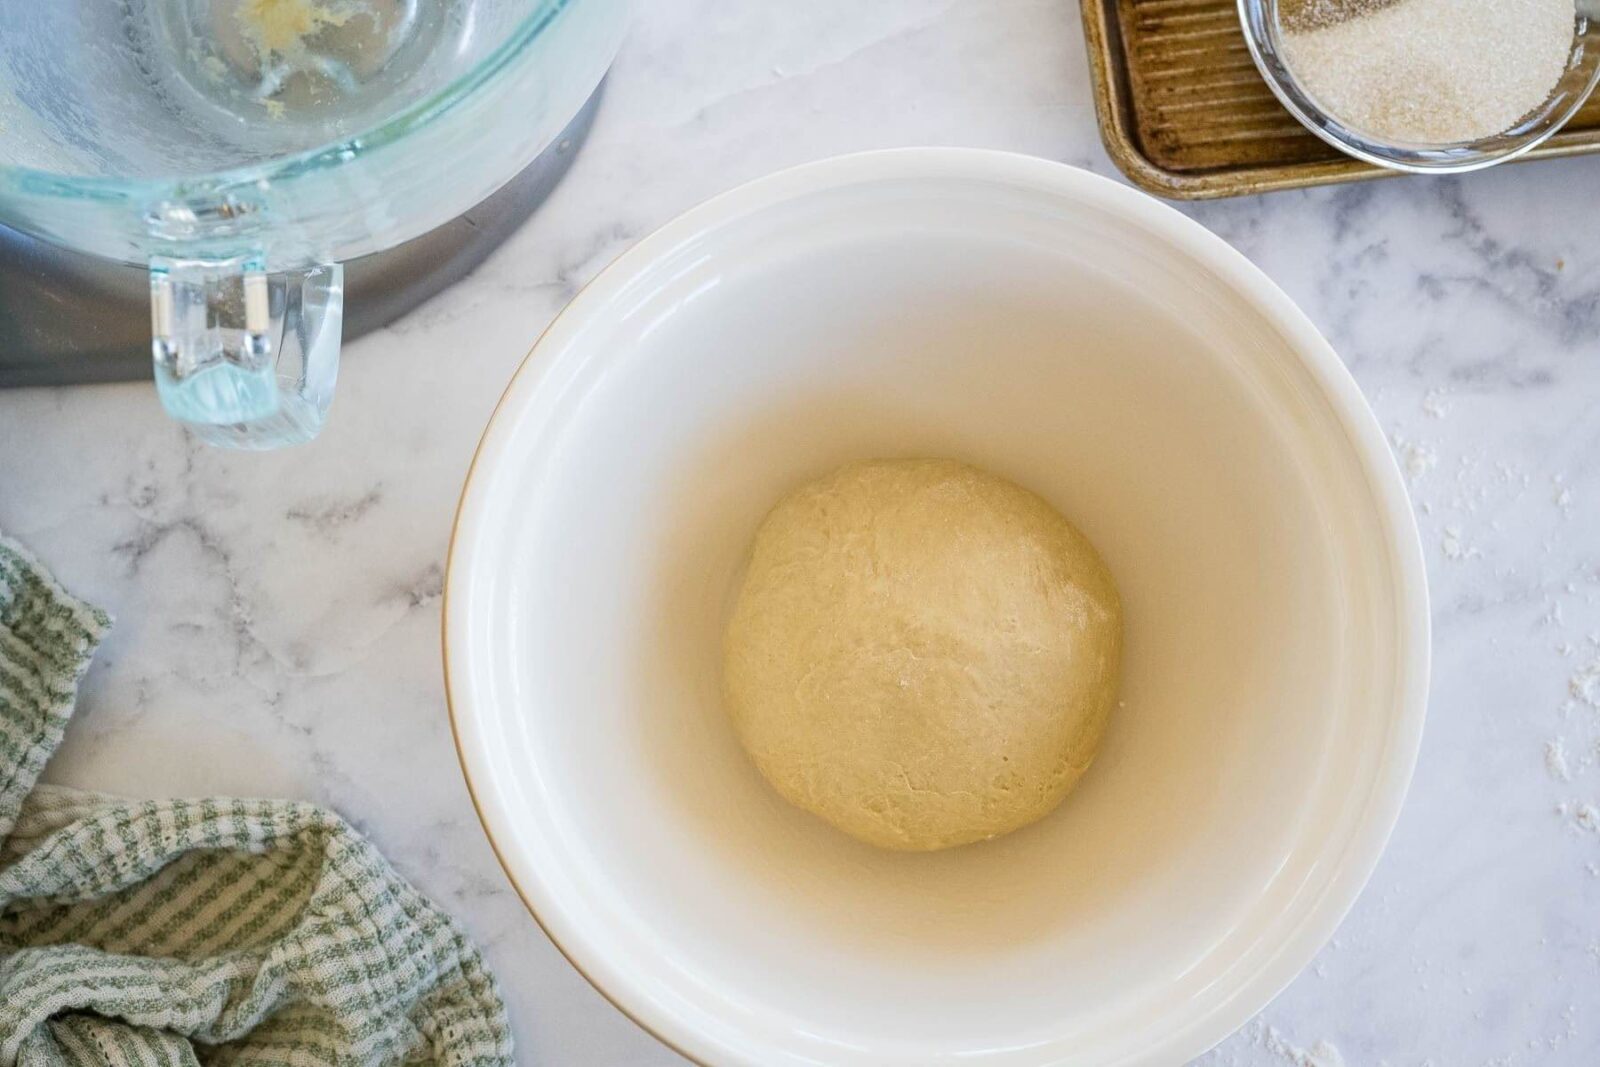 A smooth, puffy dough ball sits and a greased bowl.